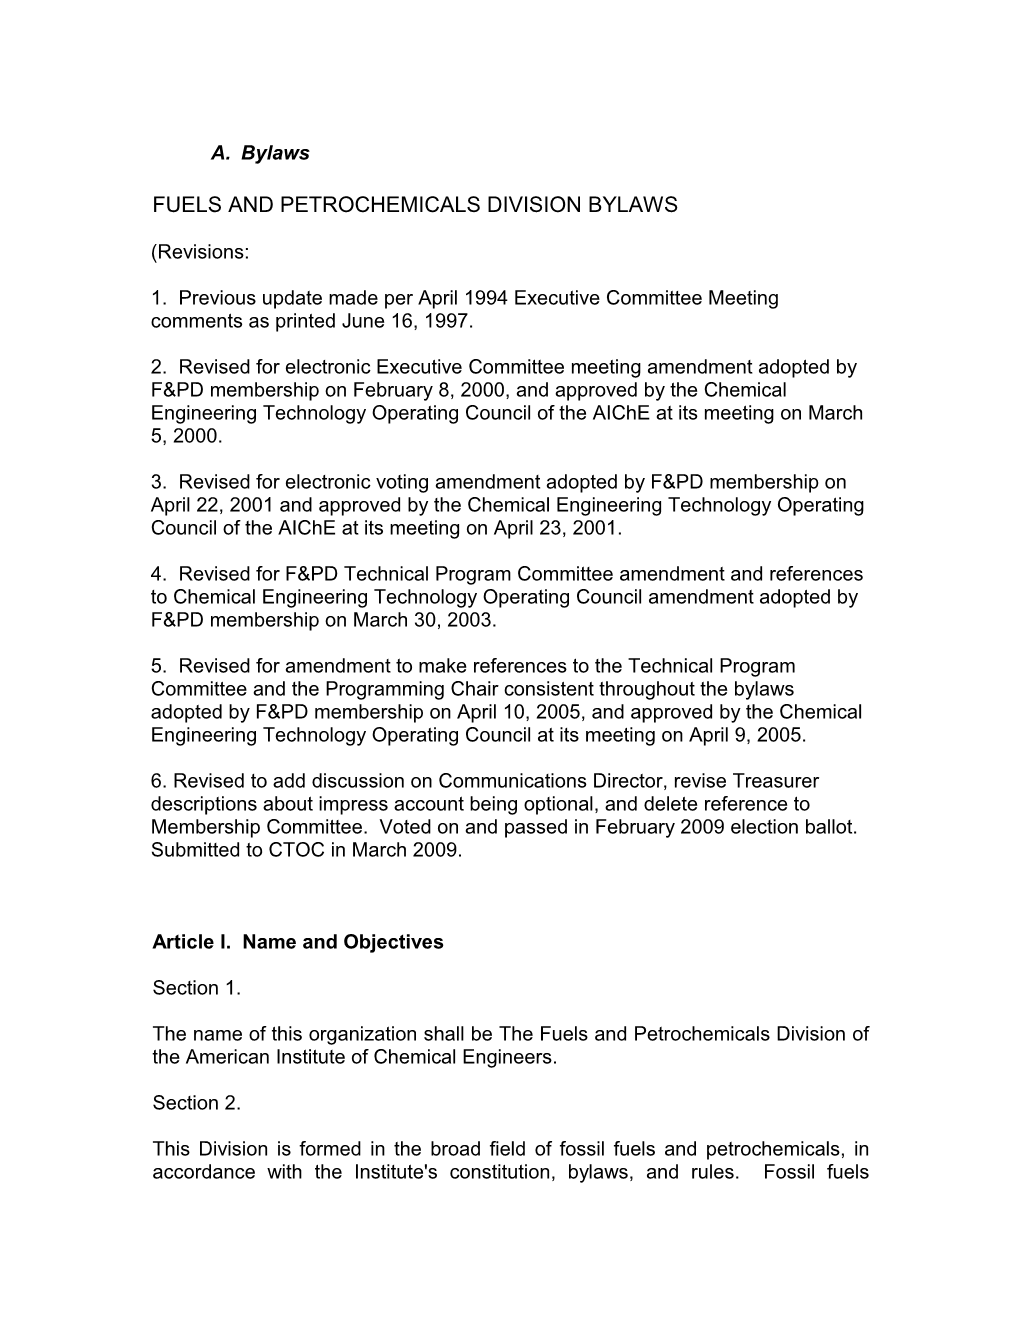 Fuels and Petrochemicals Division Bylaws